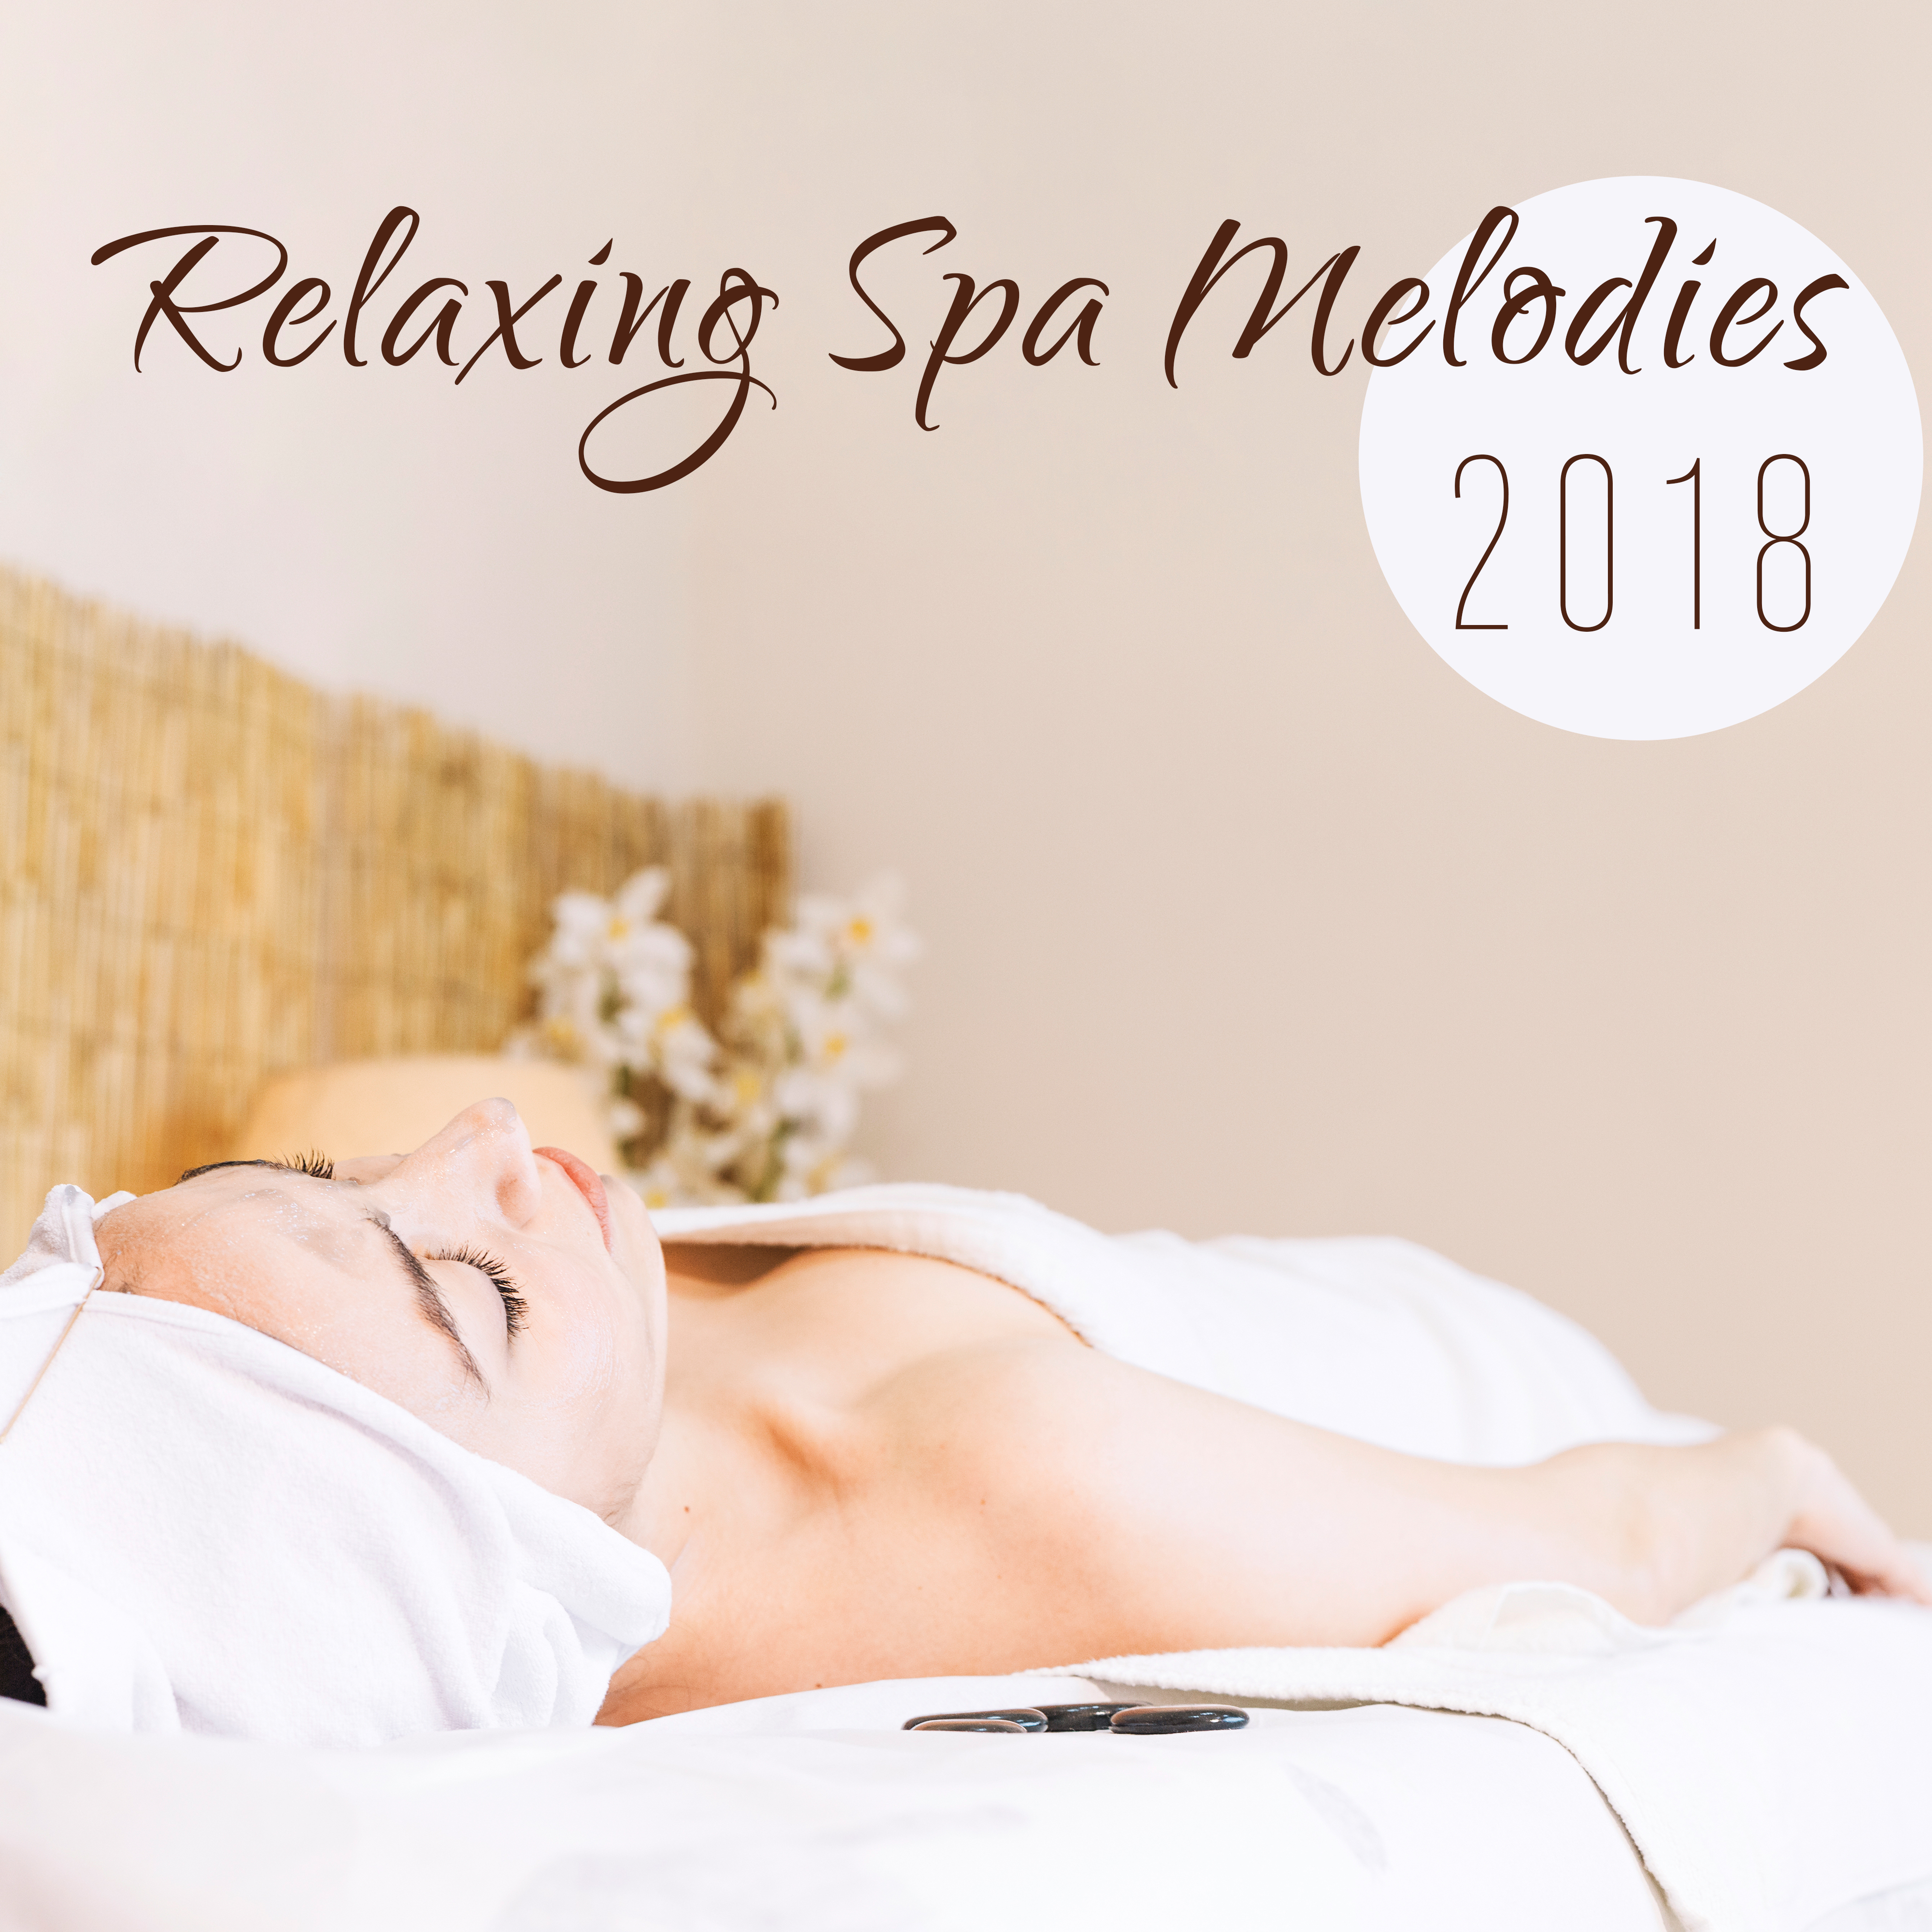 Relaxing Spa Melodies 2018